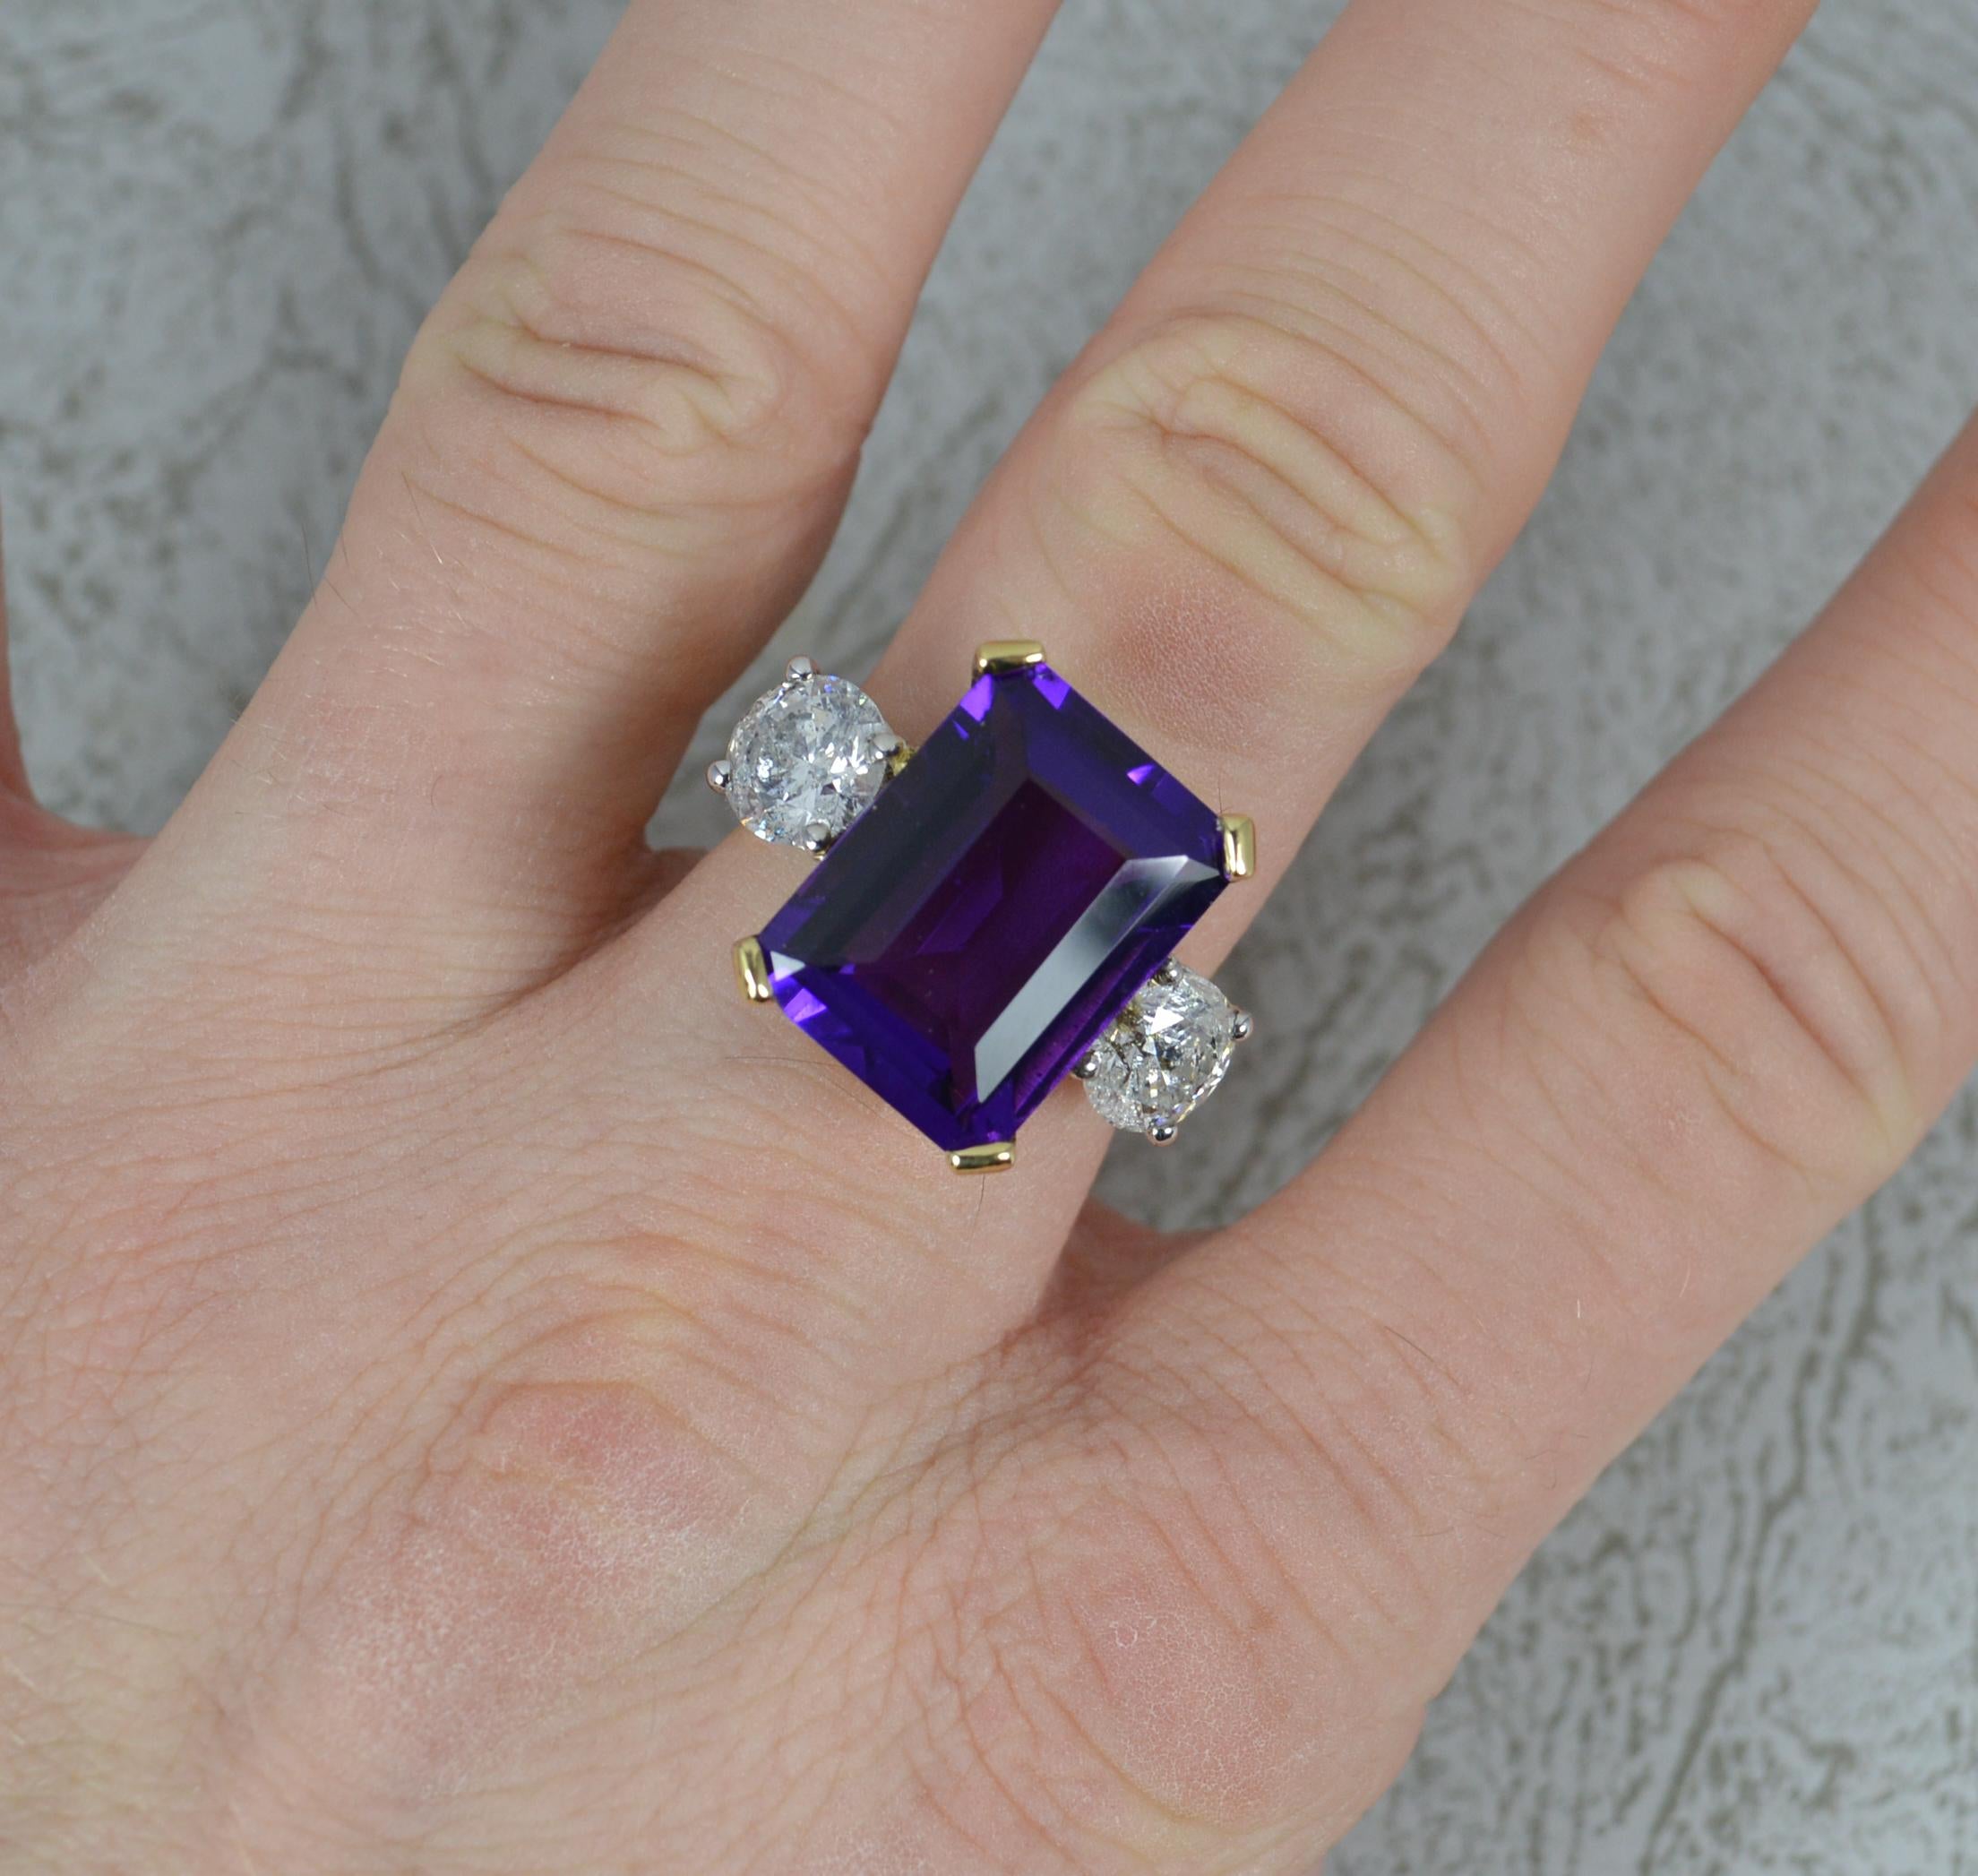 A stunning Amethyst and Diamond three stone ring.
Solid 18 carat yellow gold example with white gold settings for the diamonds.
Designed with a large emerald cut, vivid purple colour amethyst to centre in four claw setting. 12mm x 16mm stone.
To